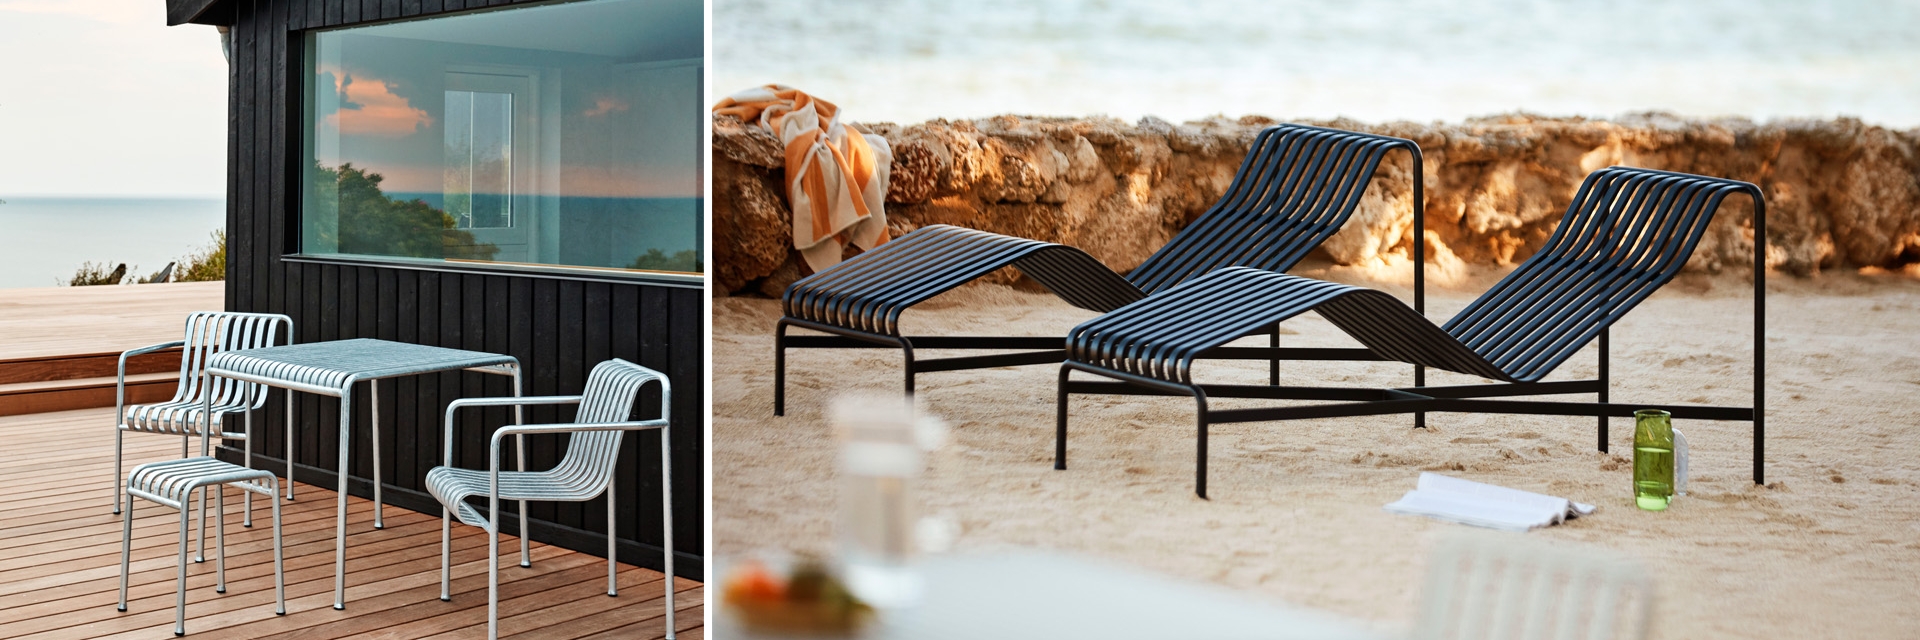 Palissade Collection by Hay, Palissade Outdoor Collection designed by French brothers Ronan and Erwan Bouroullec,